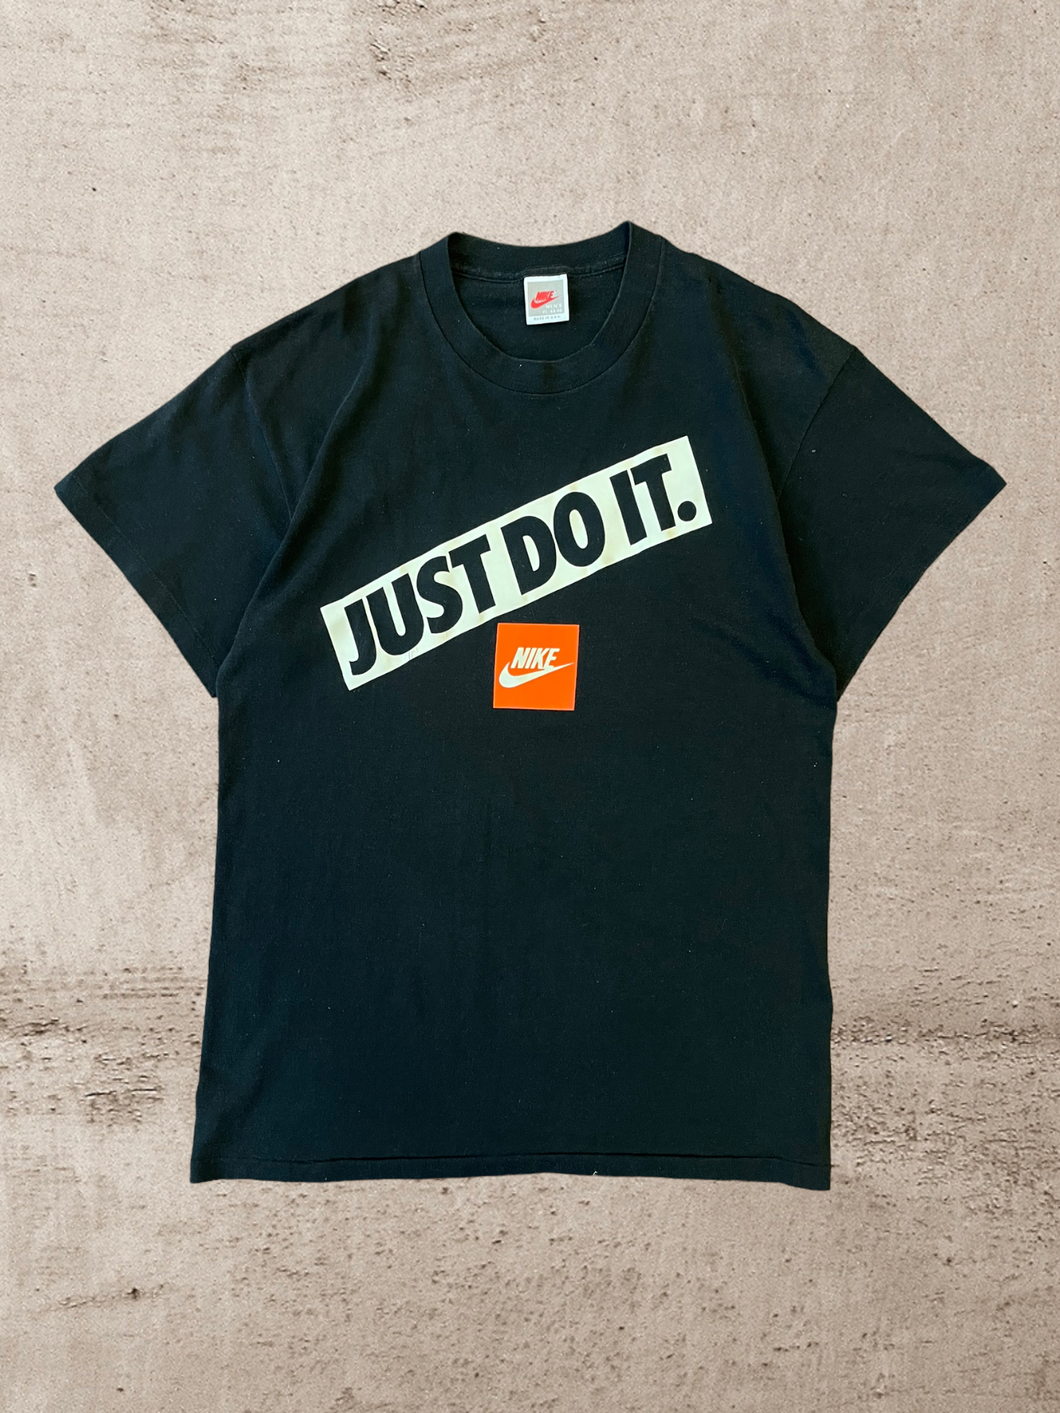 90s Nike Just Do It T-Shirt - Large